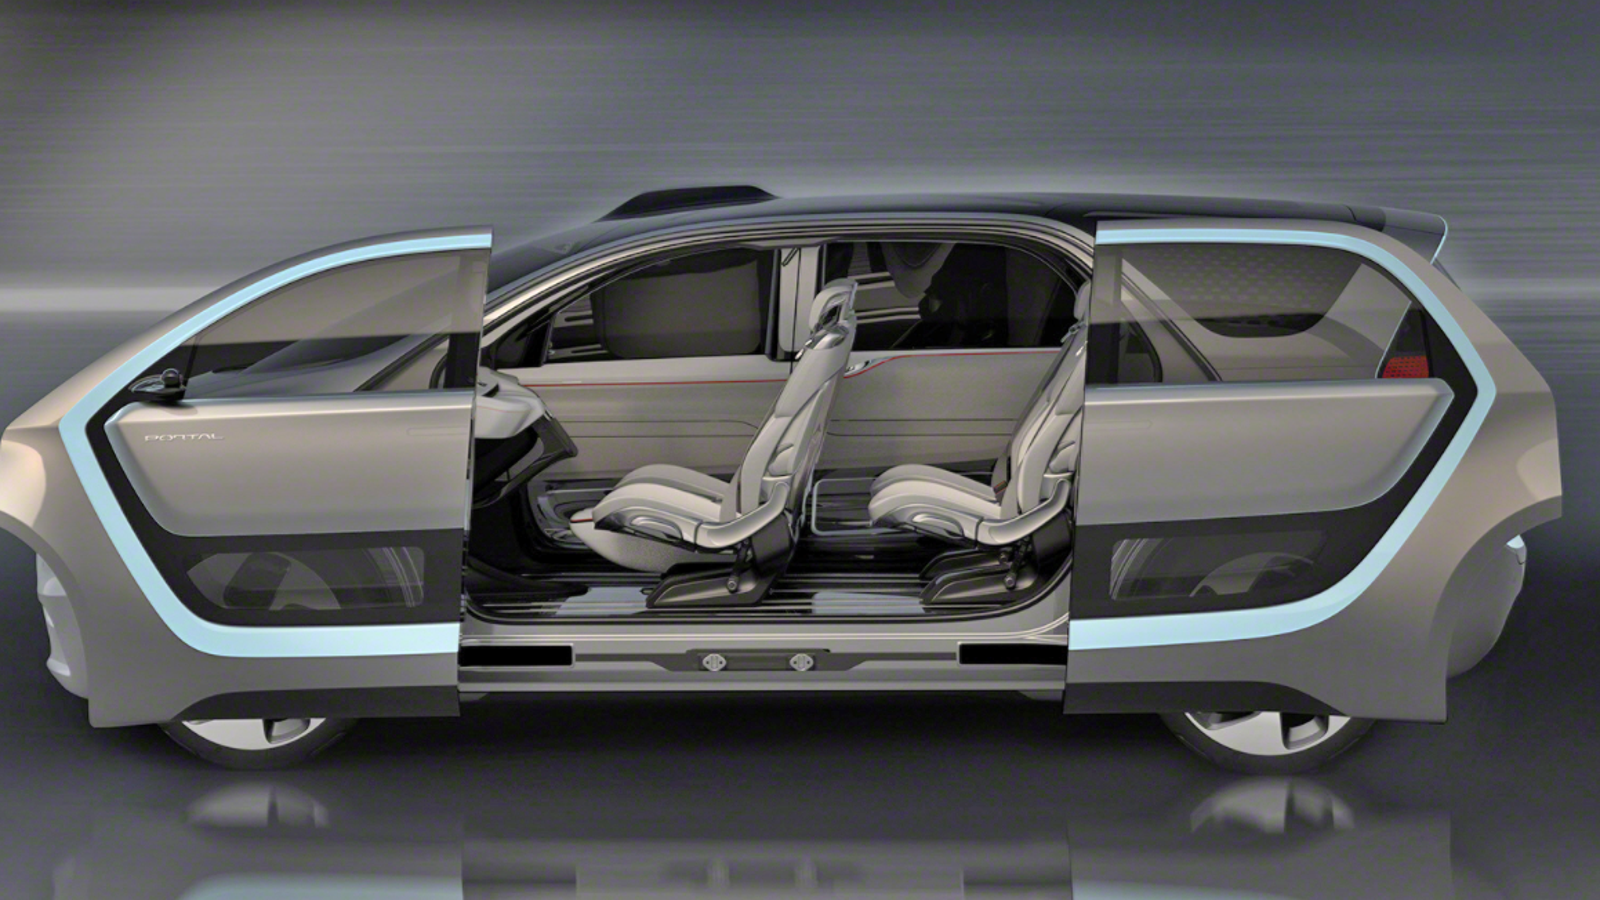 The Chrysler Portal Is A SelfDriving Electric Mobile Room That Makes A